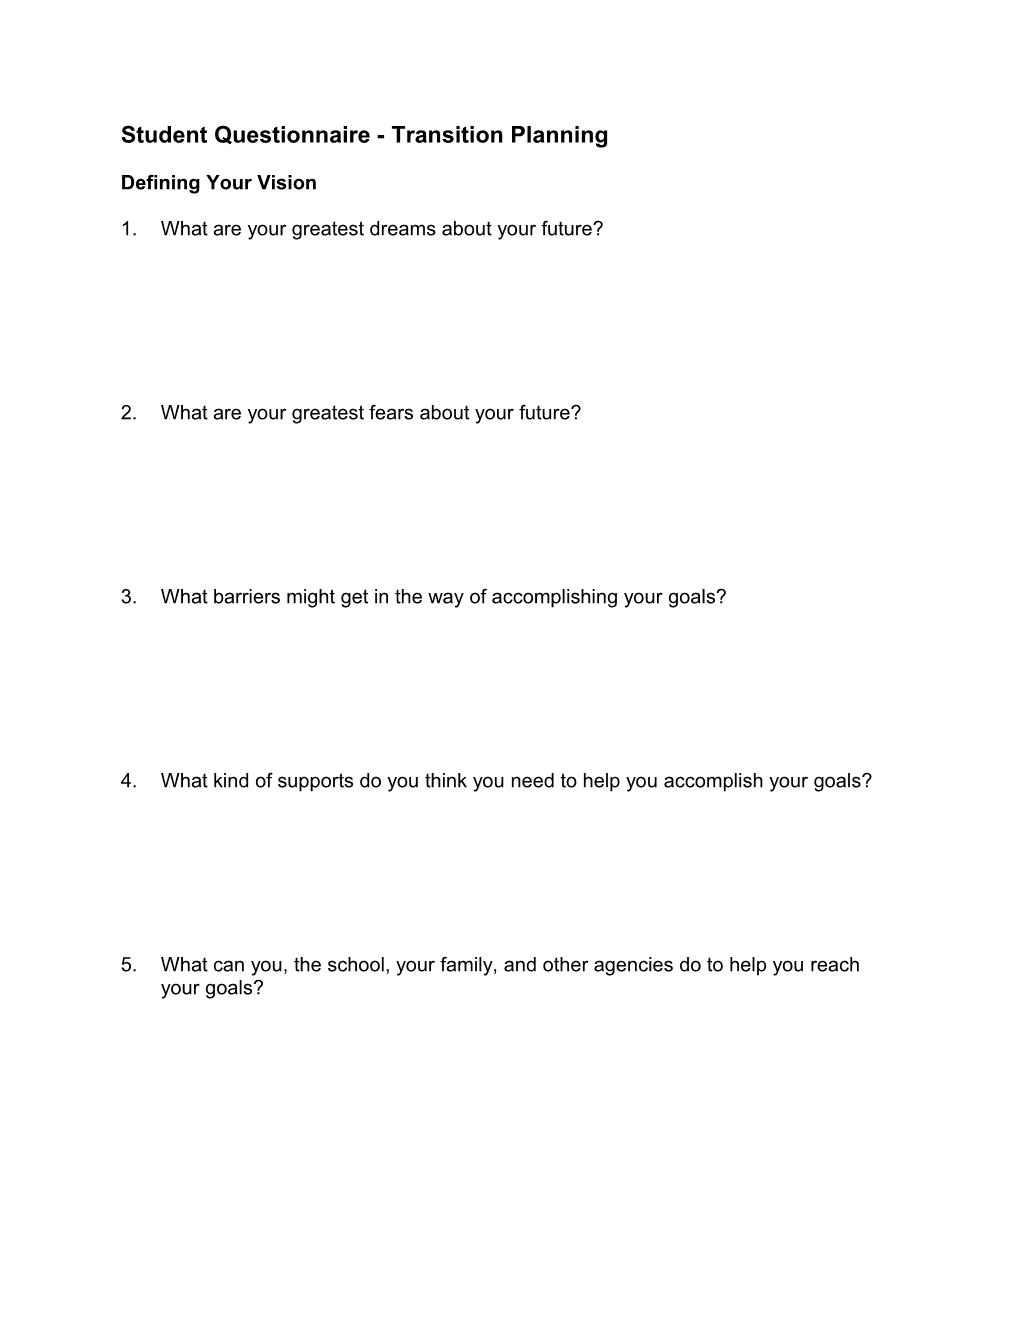 Student Questionnaire - Transition Planning